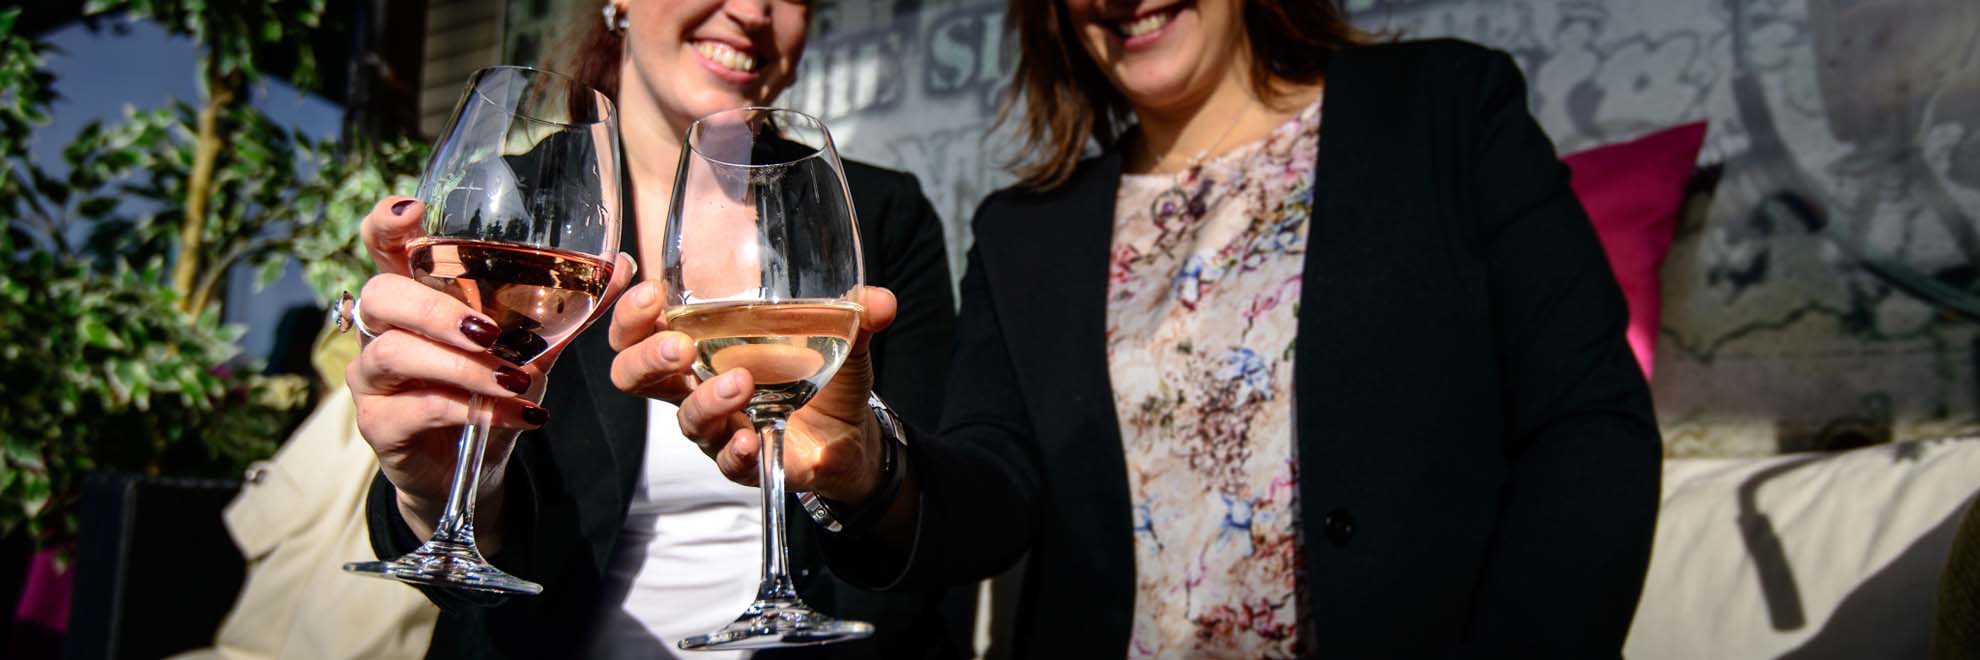 two women holding a glass of wine